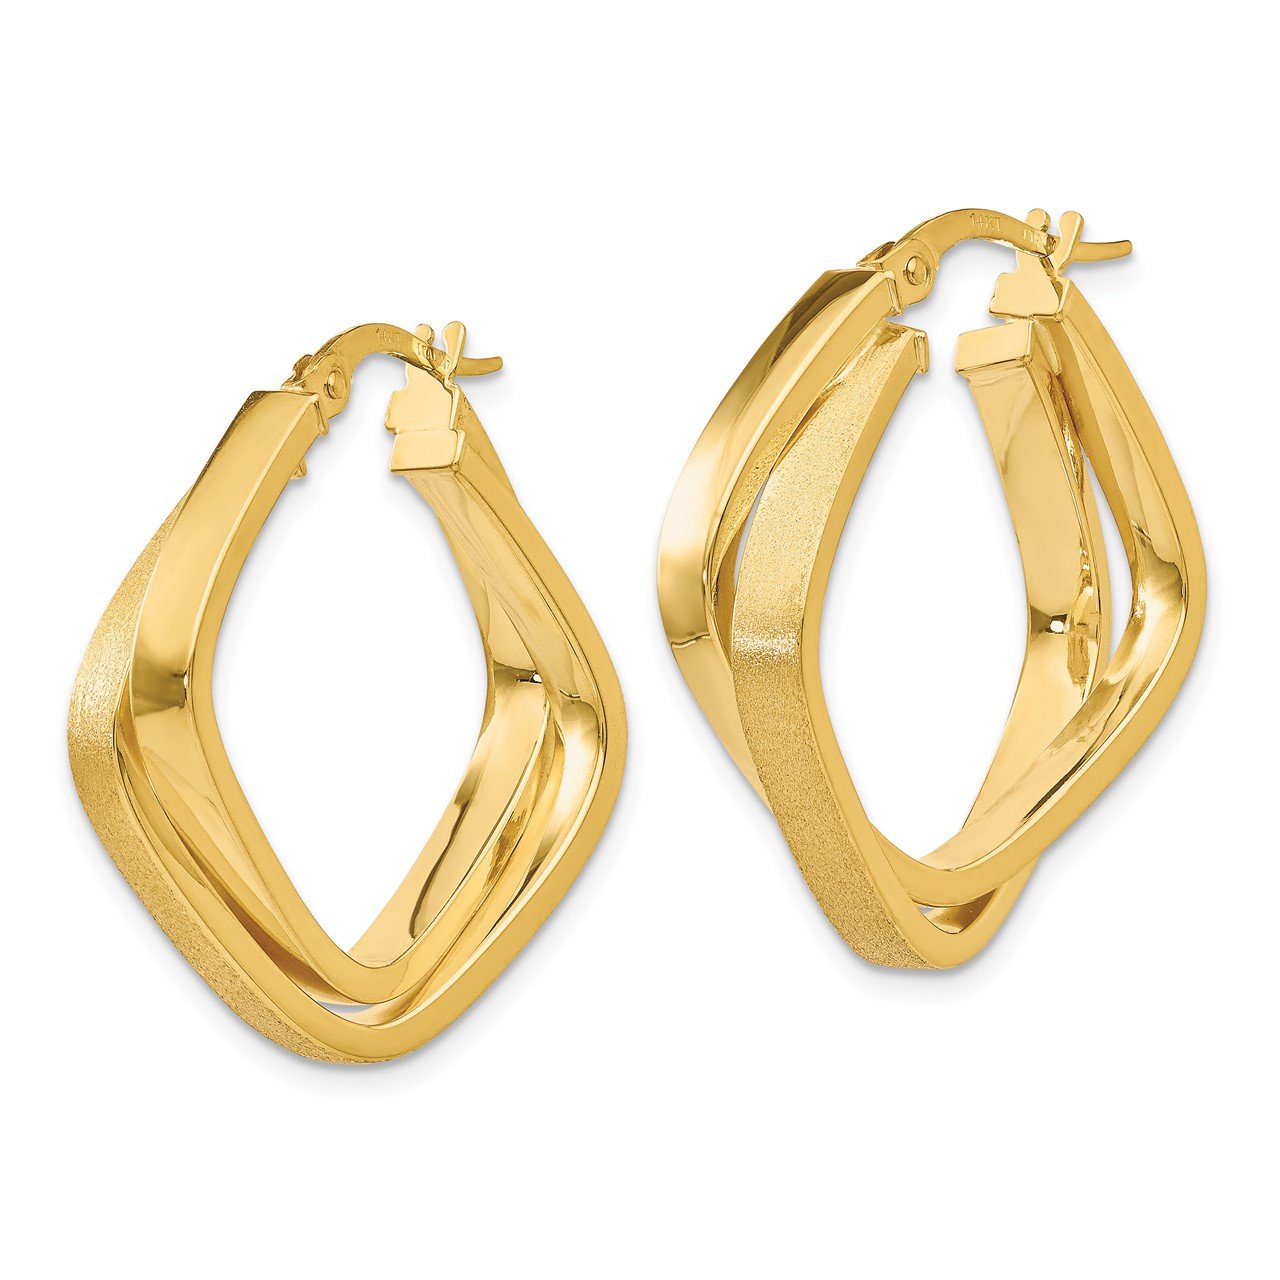 Leslie's 14K Polished and Scratch-finish Square Hoop Earrings-1